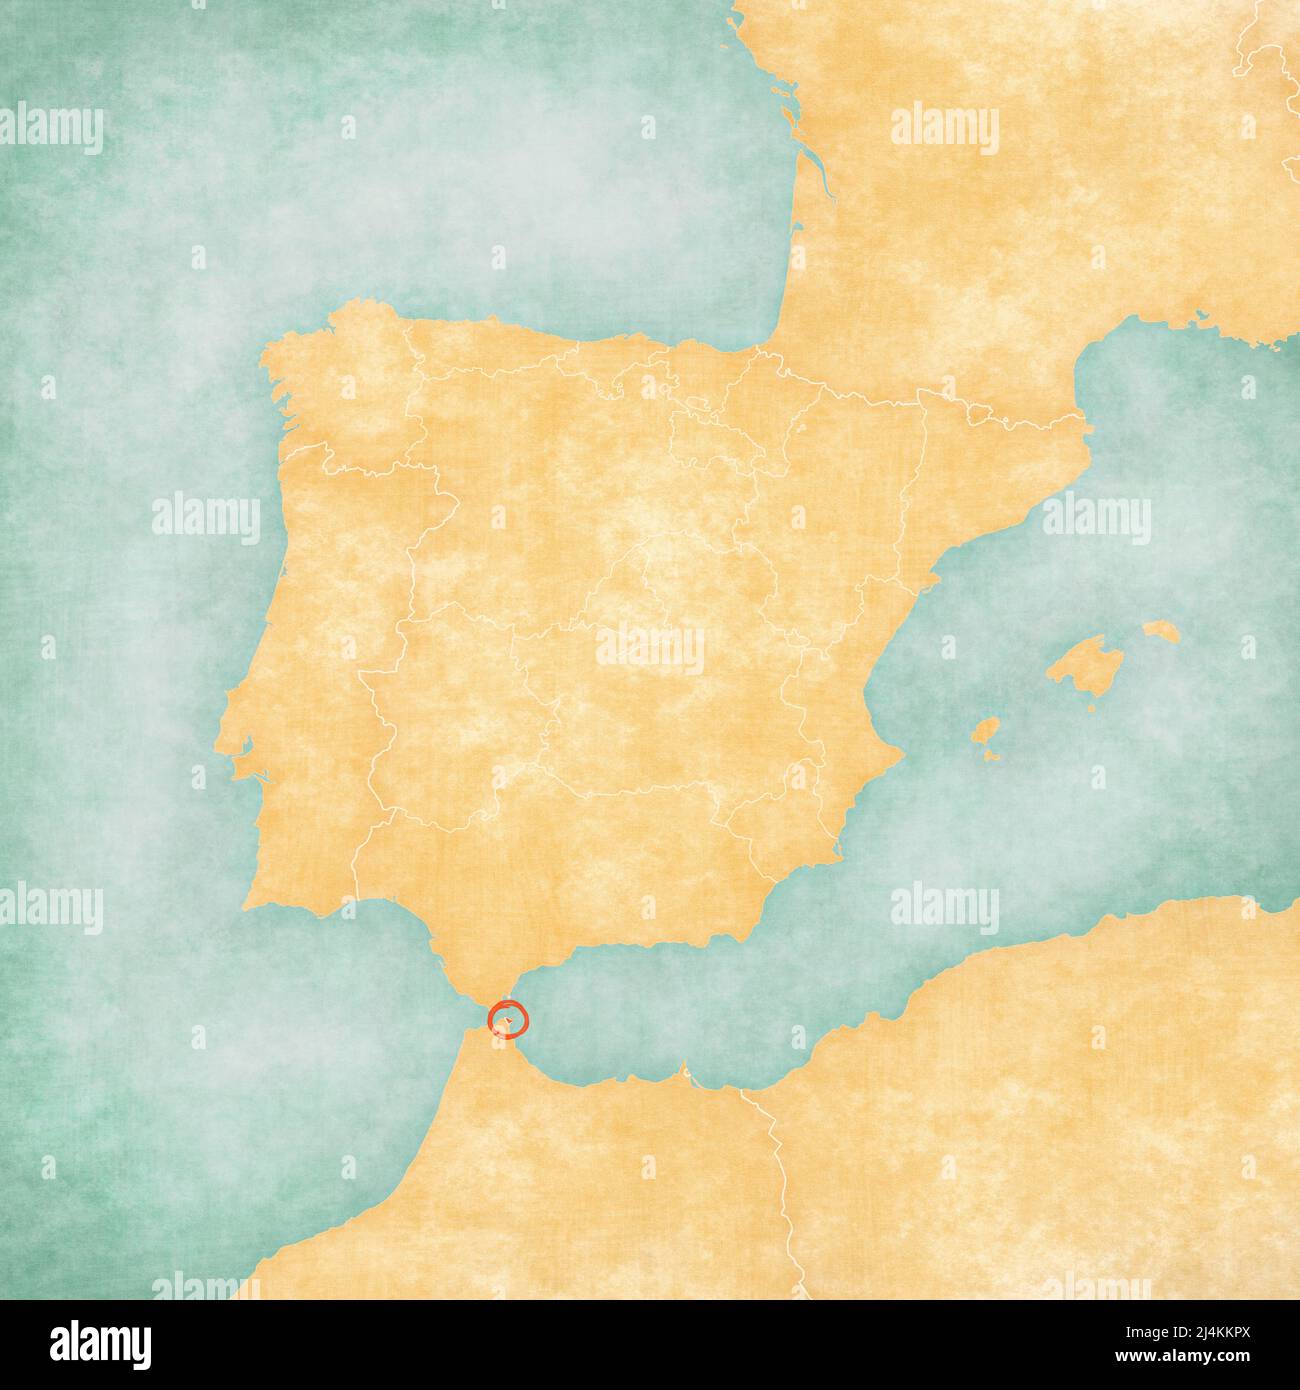 Ceuta on the map of Iberian Peninsula in soft grunge and vintage style on old paper. Stock Photo